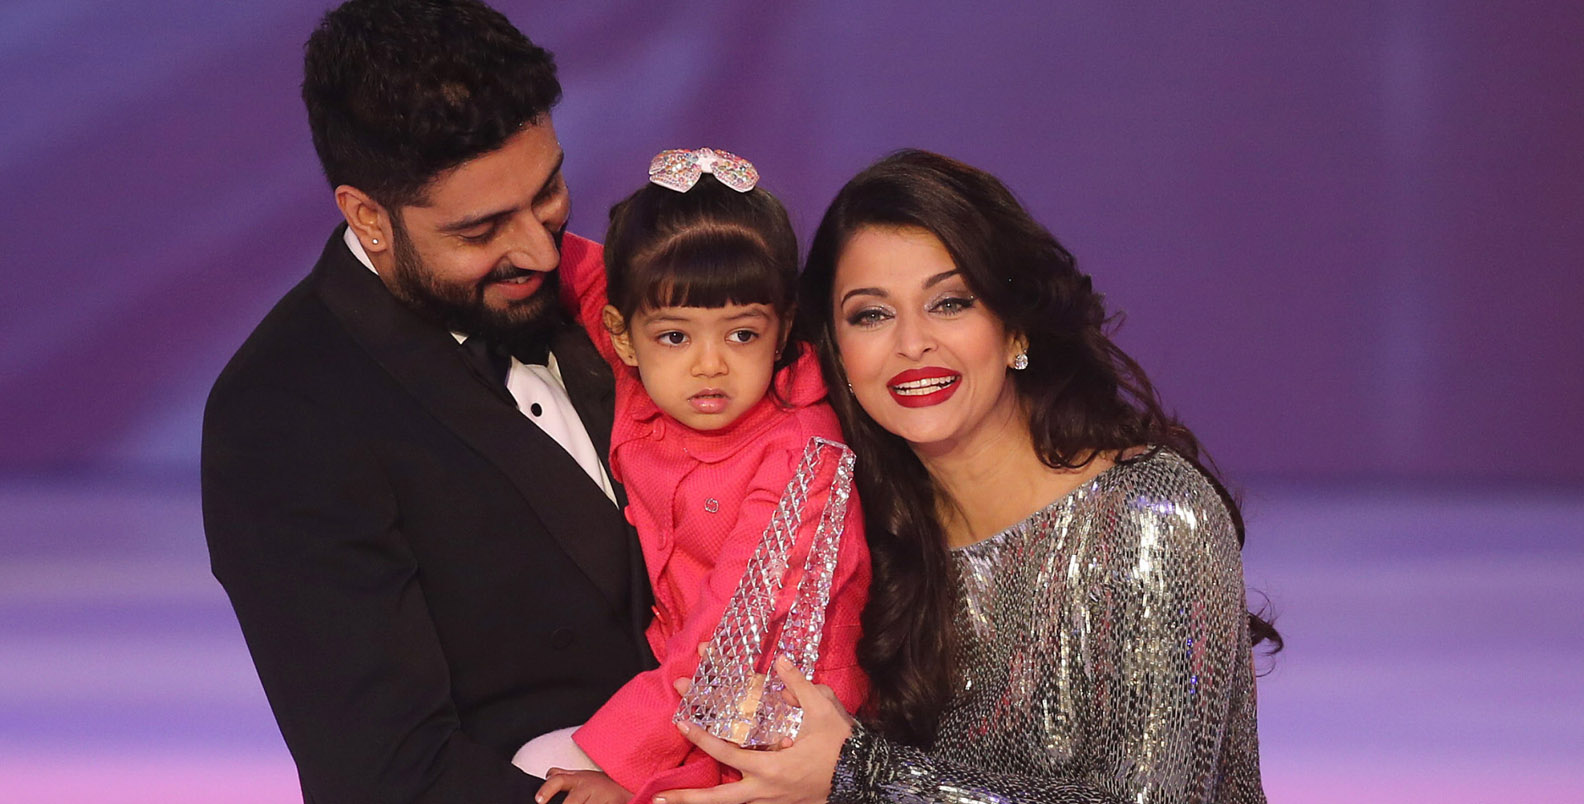 Watch: Aishwarya Rai gets teary eyed after paparazzi misbehaves - Life &  Style - Business Recorder